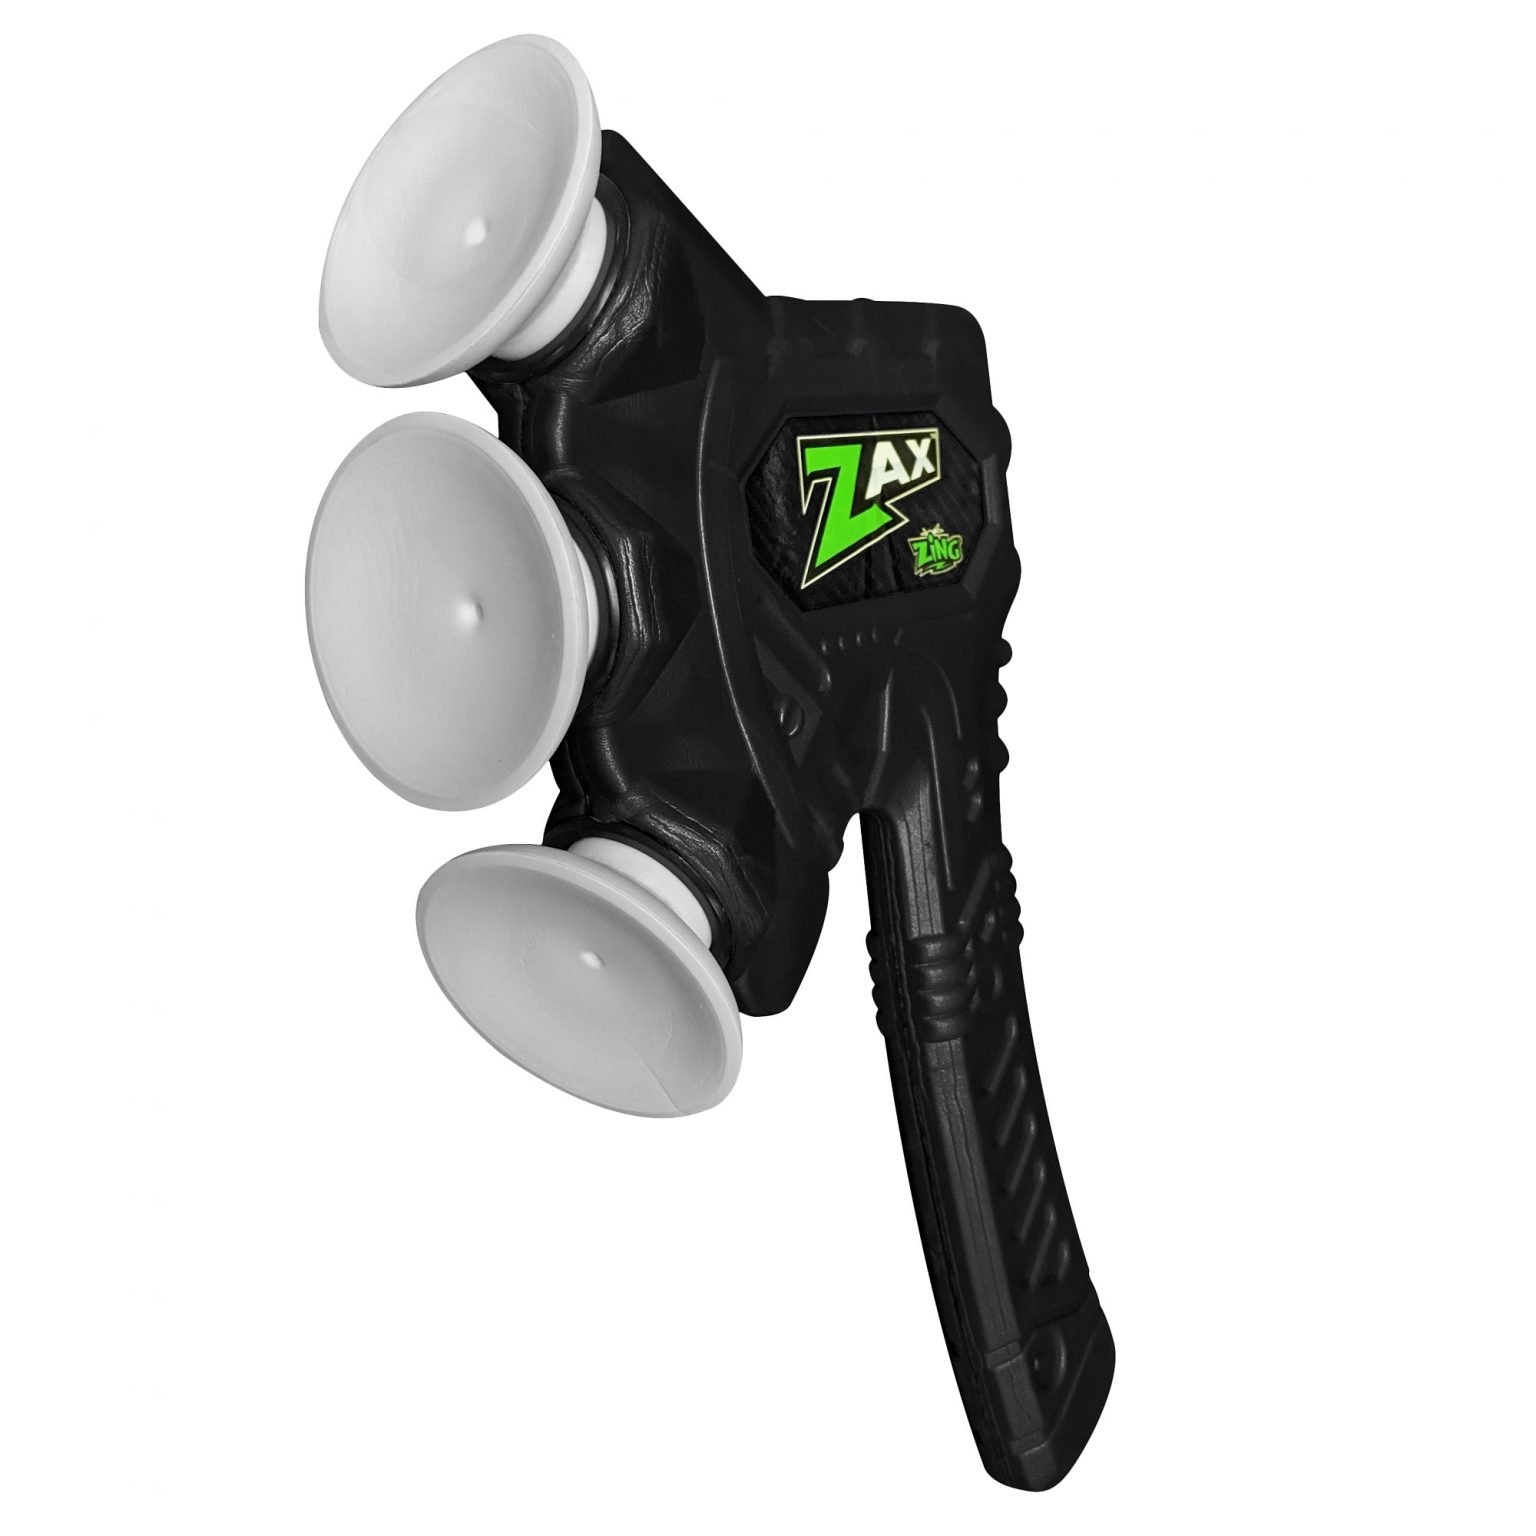 Zing Zax Soft and Safe Foam Throwing Axe BlasterTime